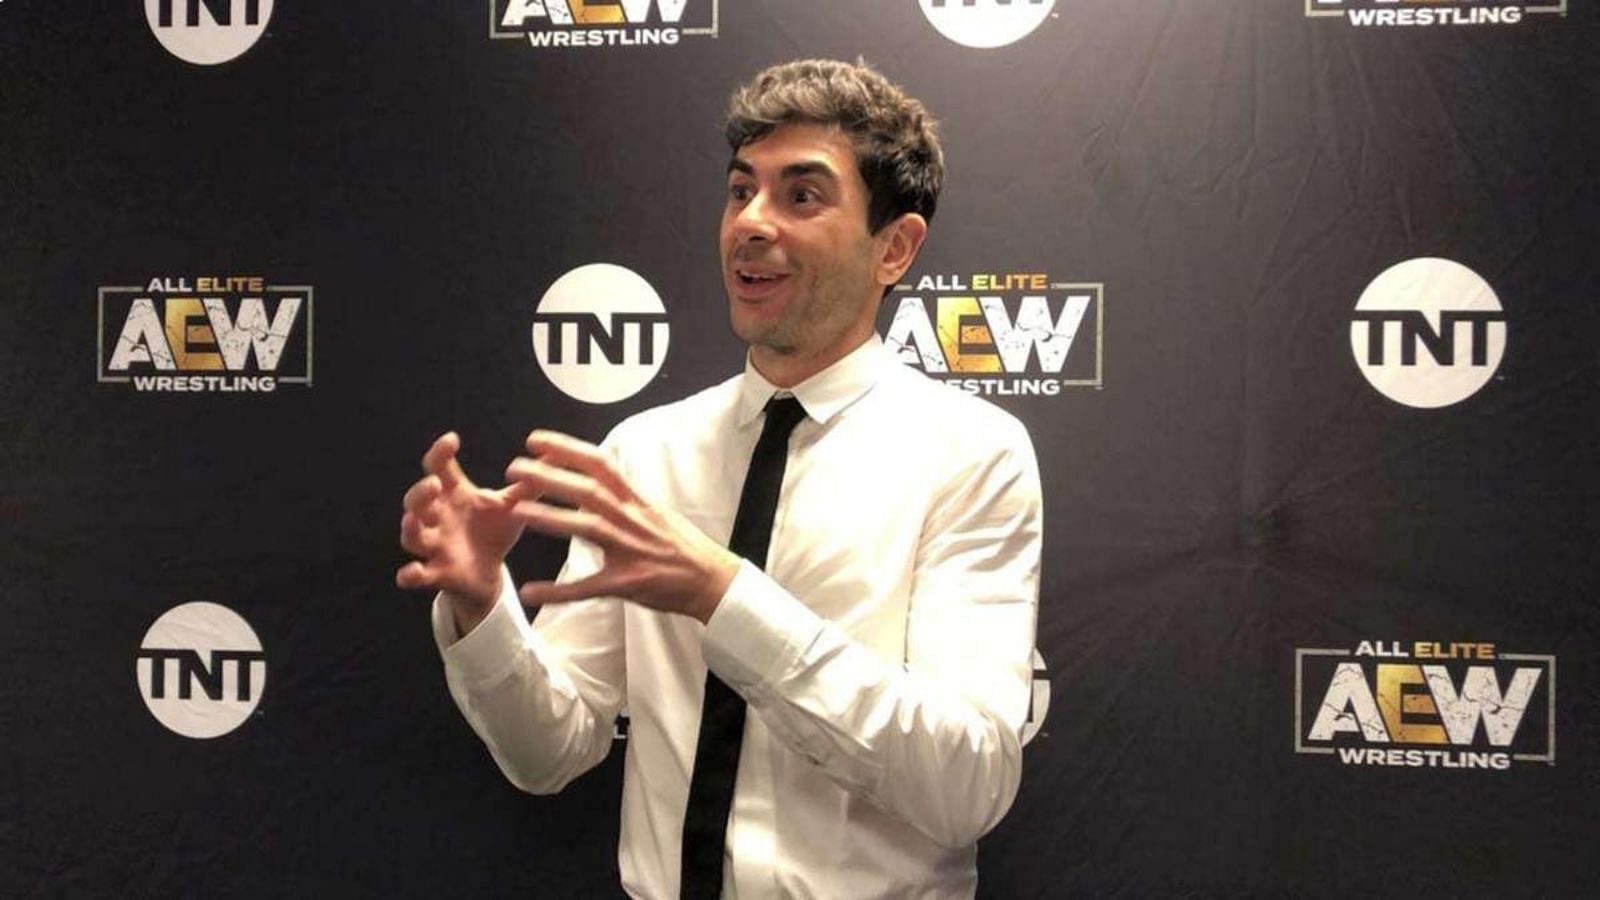 Tony Khan is one of the most powerful men in wrestling.